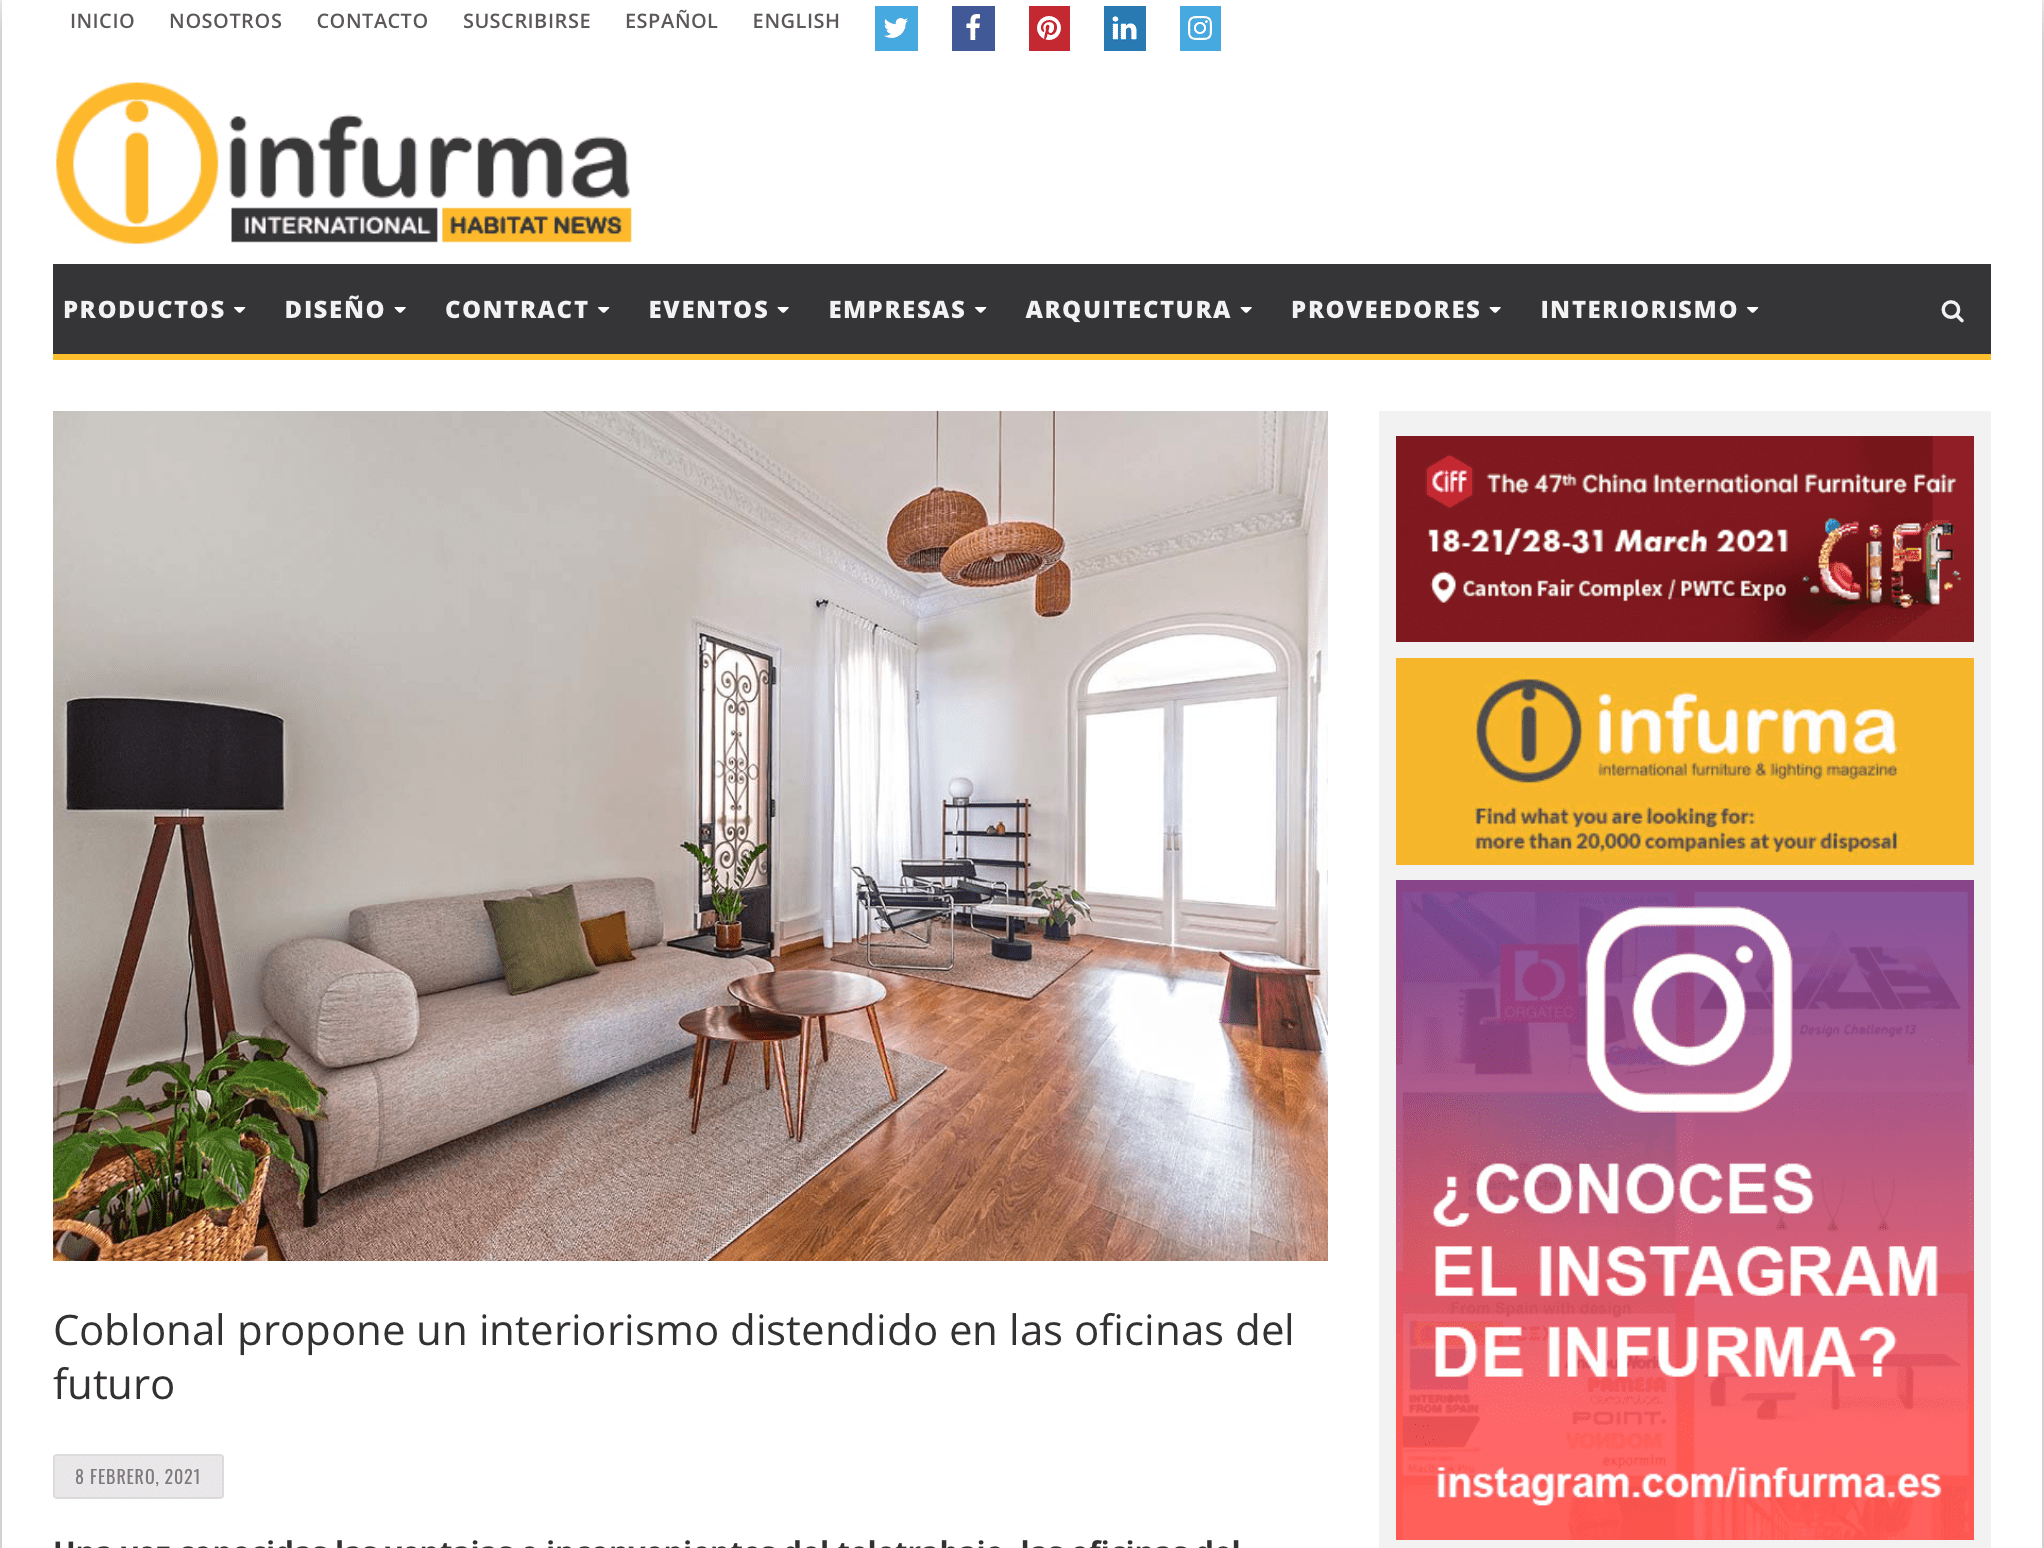 Infurma publishes our latest home-office